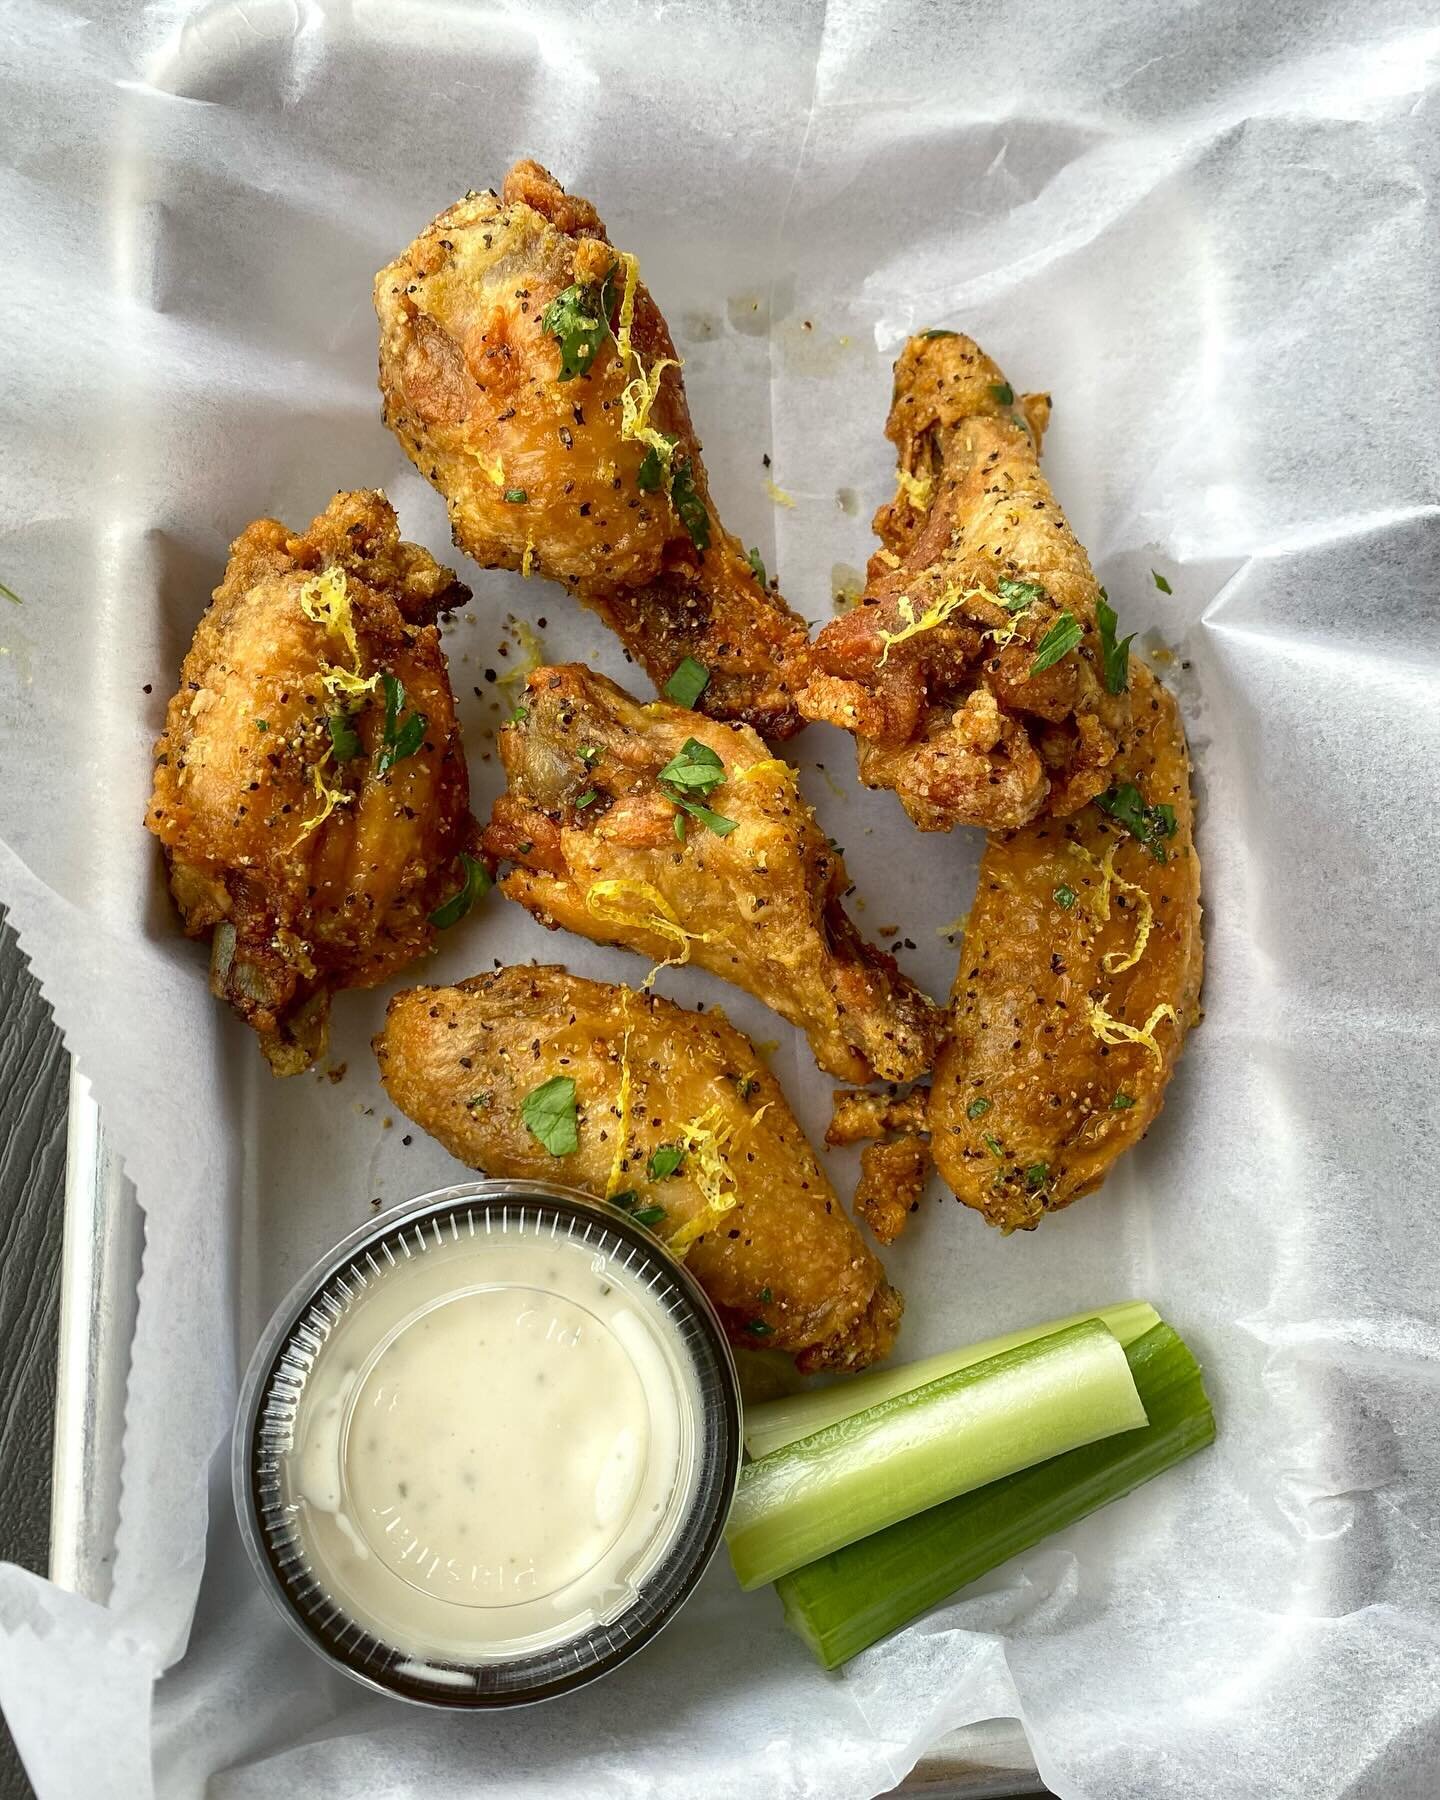 ‼️New Special Alert‼️

Lemon Pepper Wings 🍋🌶️🐔 These wings are fried until crispy and fall off the bone tender then tossed with our house made lemon pepper sauce and garnished with lemon zest! Gotta try these bad boys!

@vspc @visitsafetyharbor @c